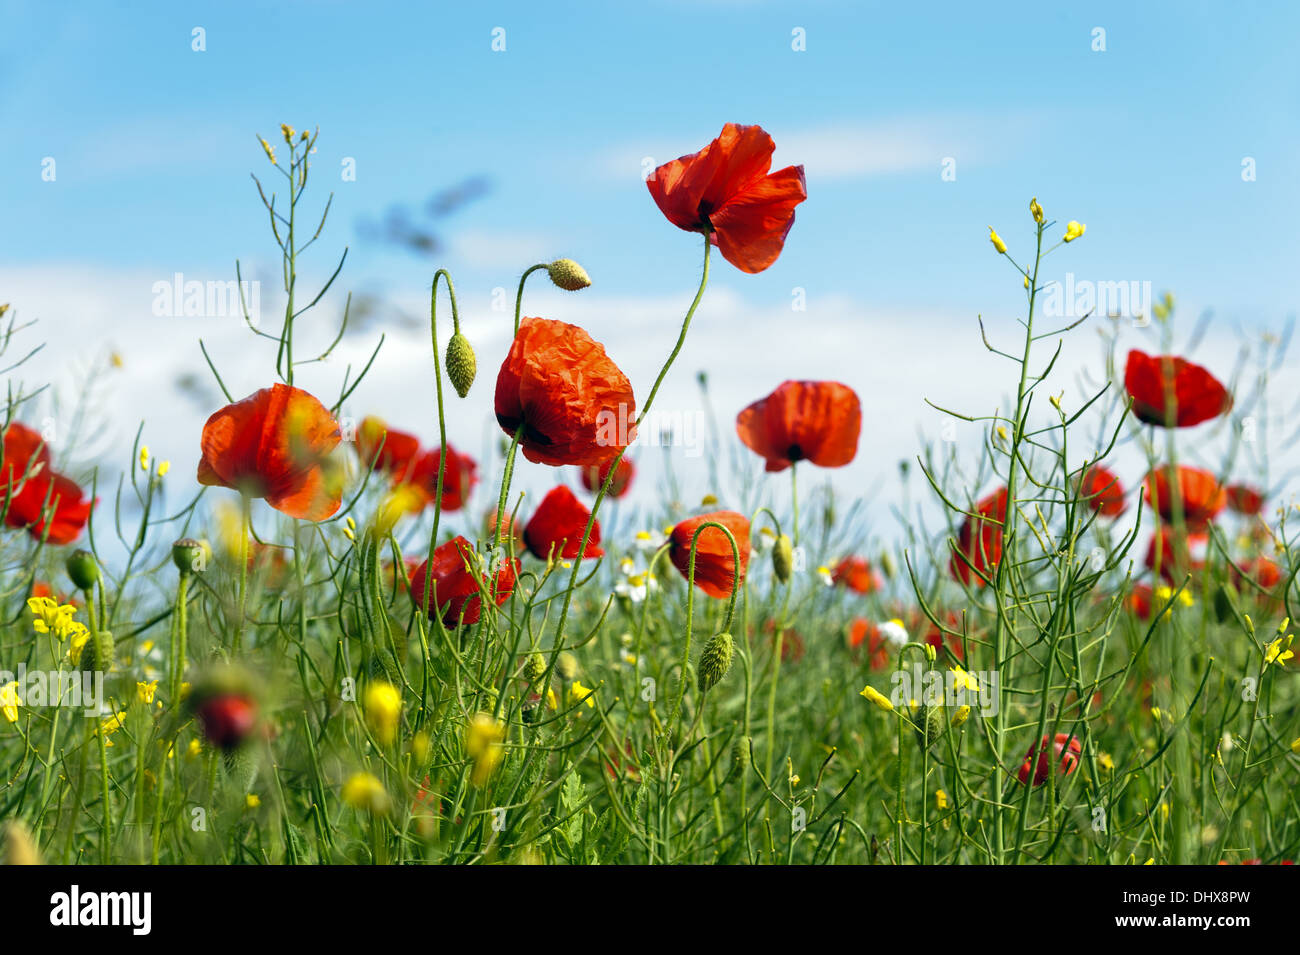 red poppies against a blue sky Stock Photo